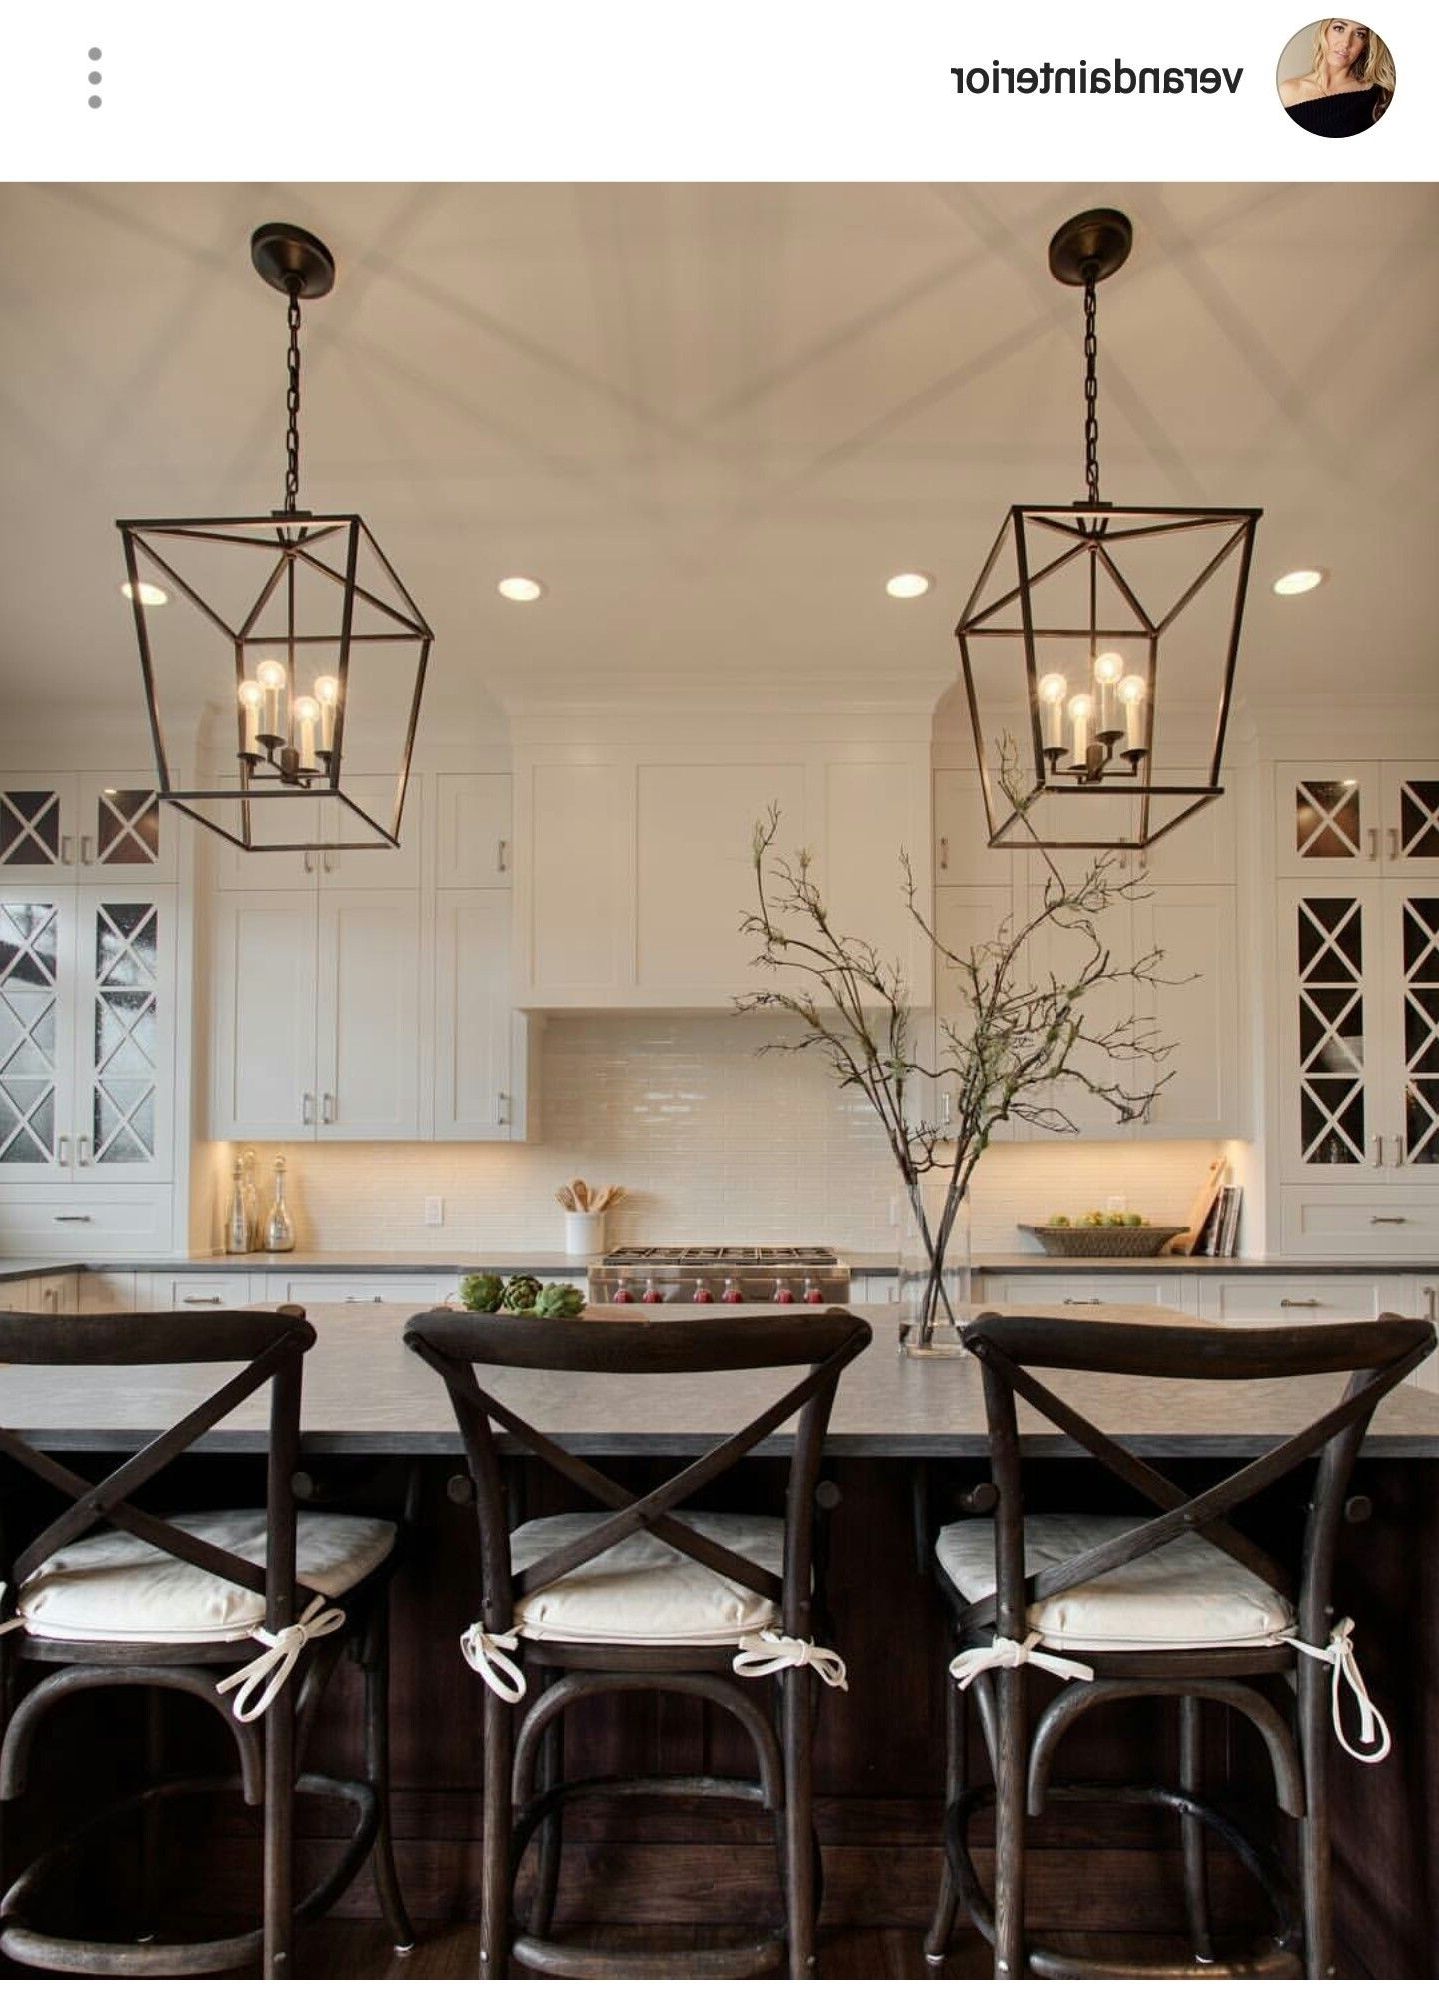 Kitchen Island Light Chandeliers Within Trendy Kitchen Pendants Lights Over Island – Ideas On Foter (View 14 of 15)